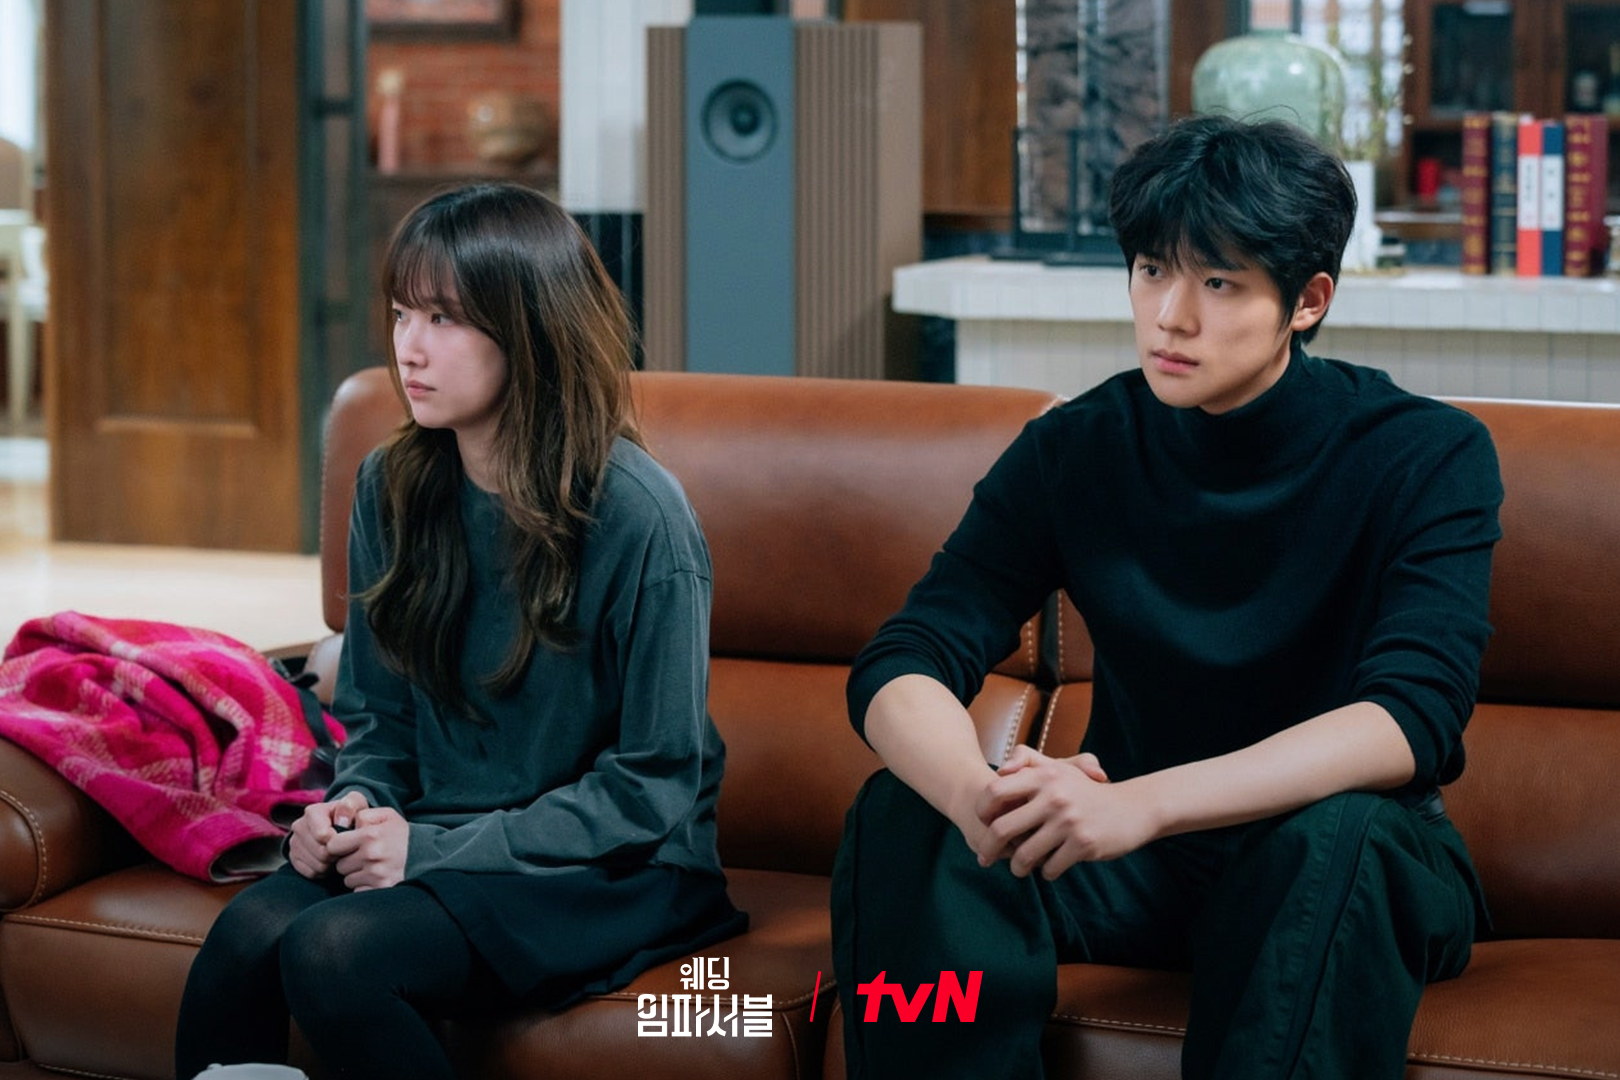 Jeon Jong Seo And Moon Sang Min Become More Deeply Intertwined In “Wedding Impossible”